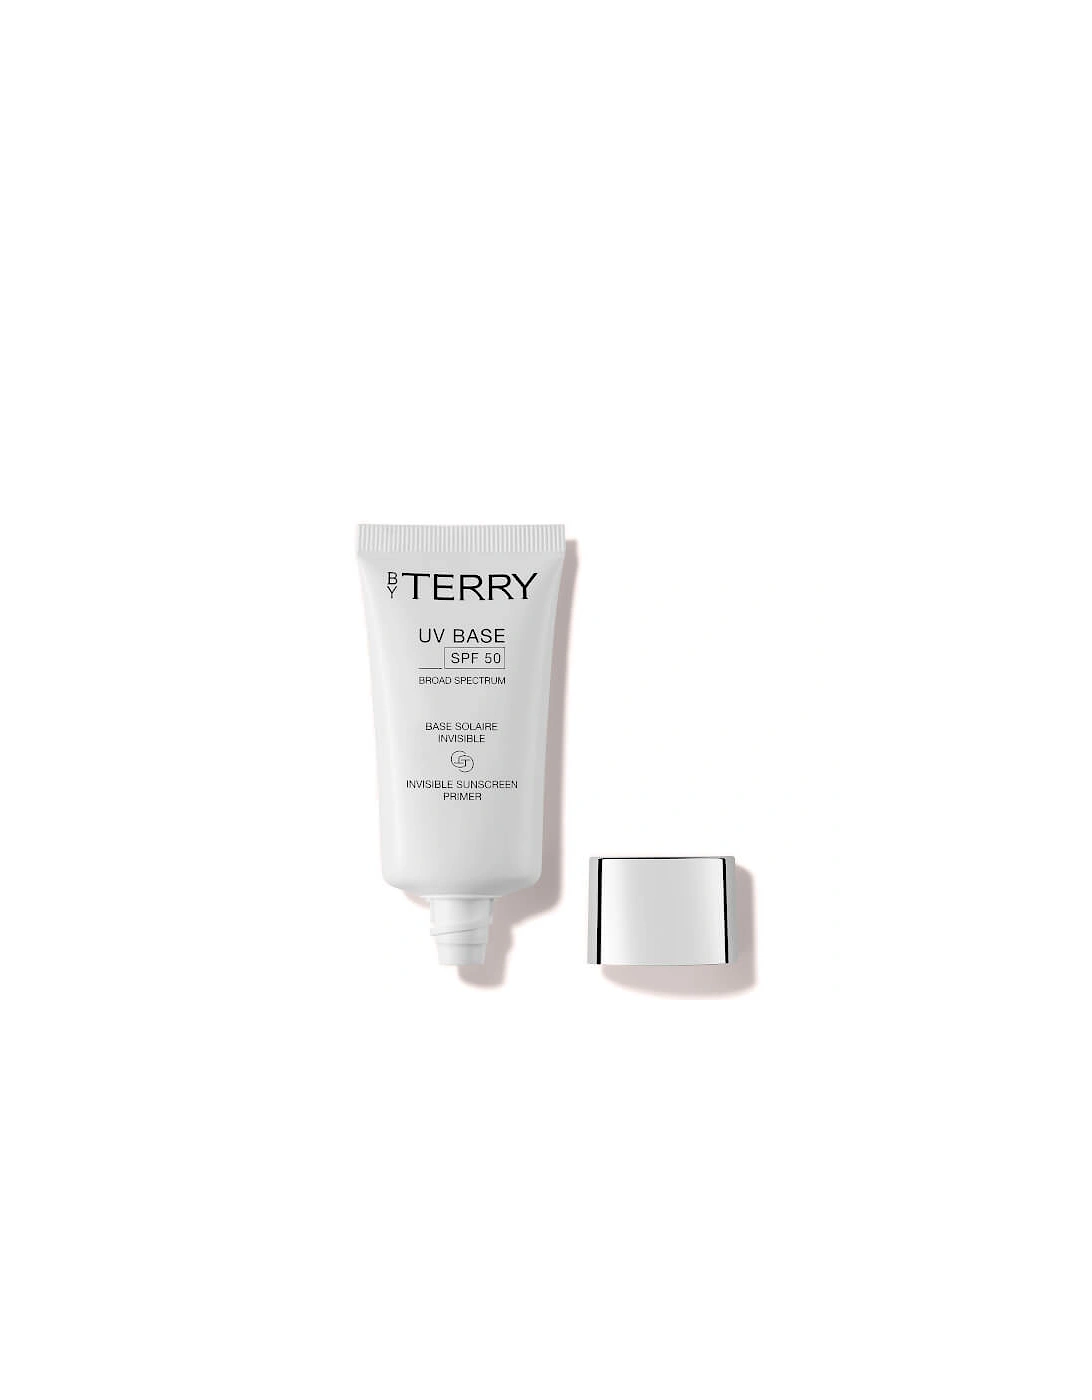 By Terry UV-Base Primer SPF 50, 2 of 1